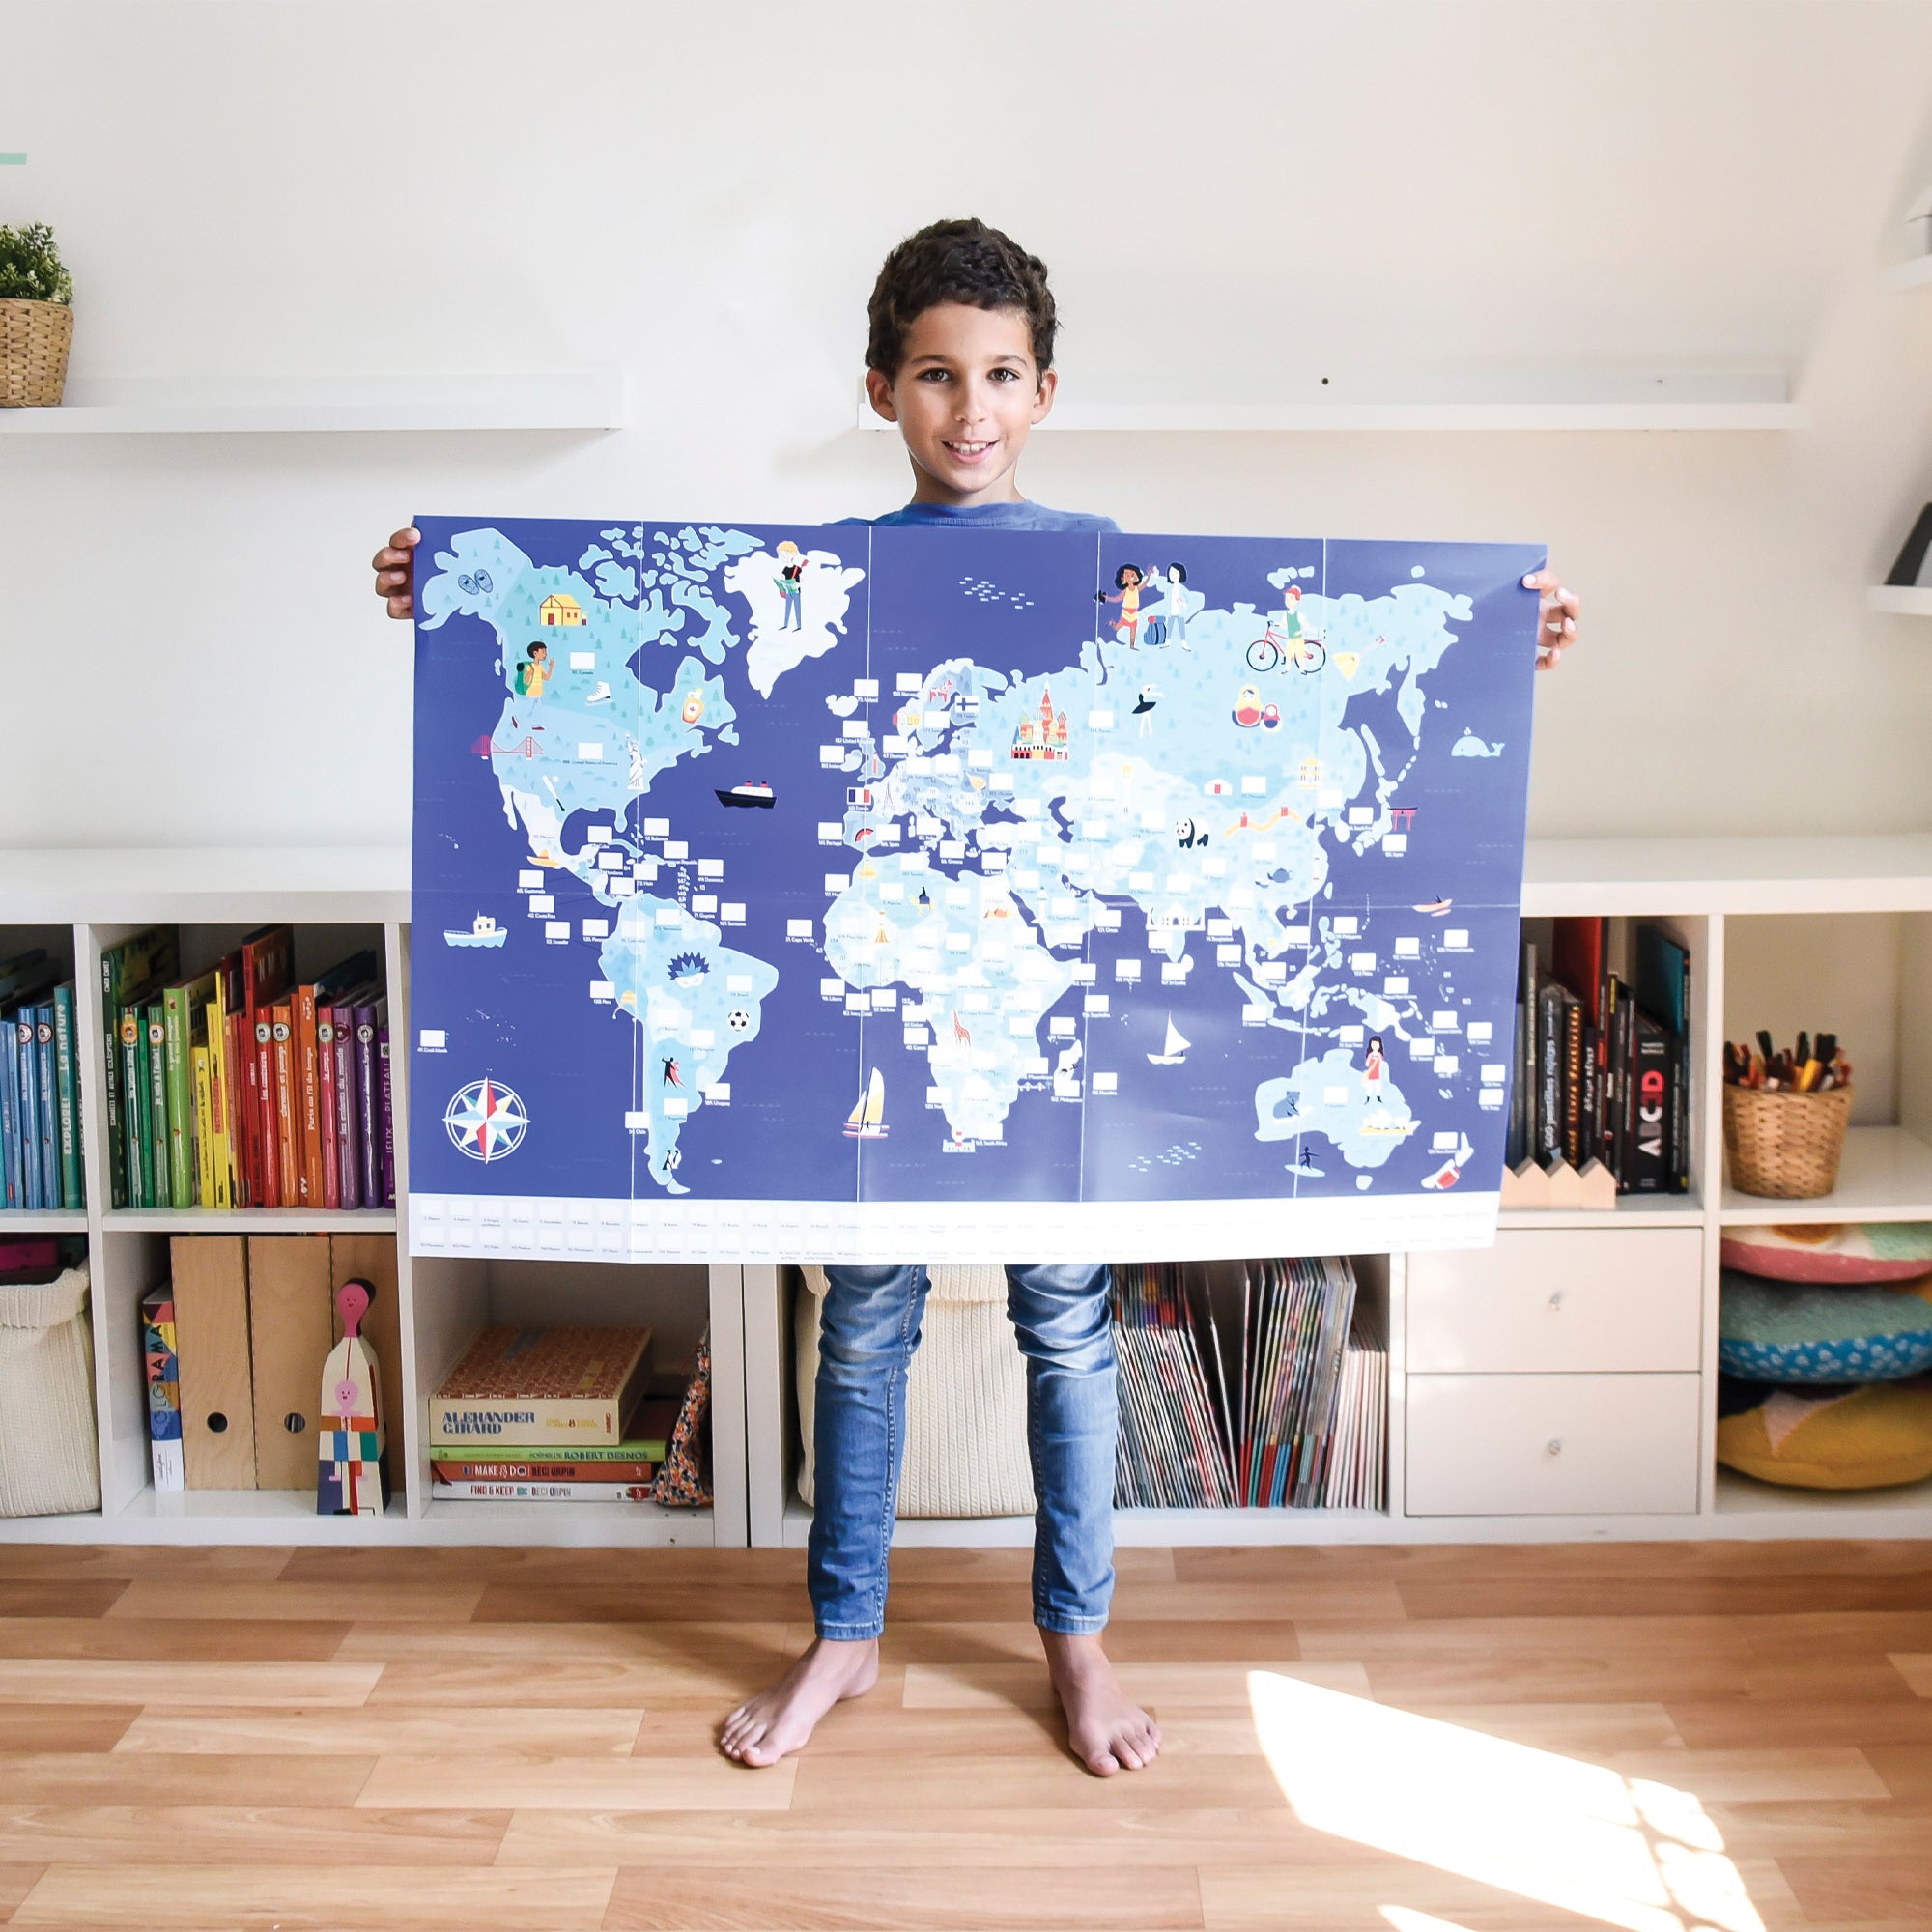 Dark-haired boy holding an outstretched world map with empty triangles for flag sticker placement. Child is wearing jeans with bare feet. In the background is a long, but short bookshelf with books and other items in front of a white wall.